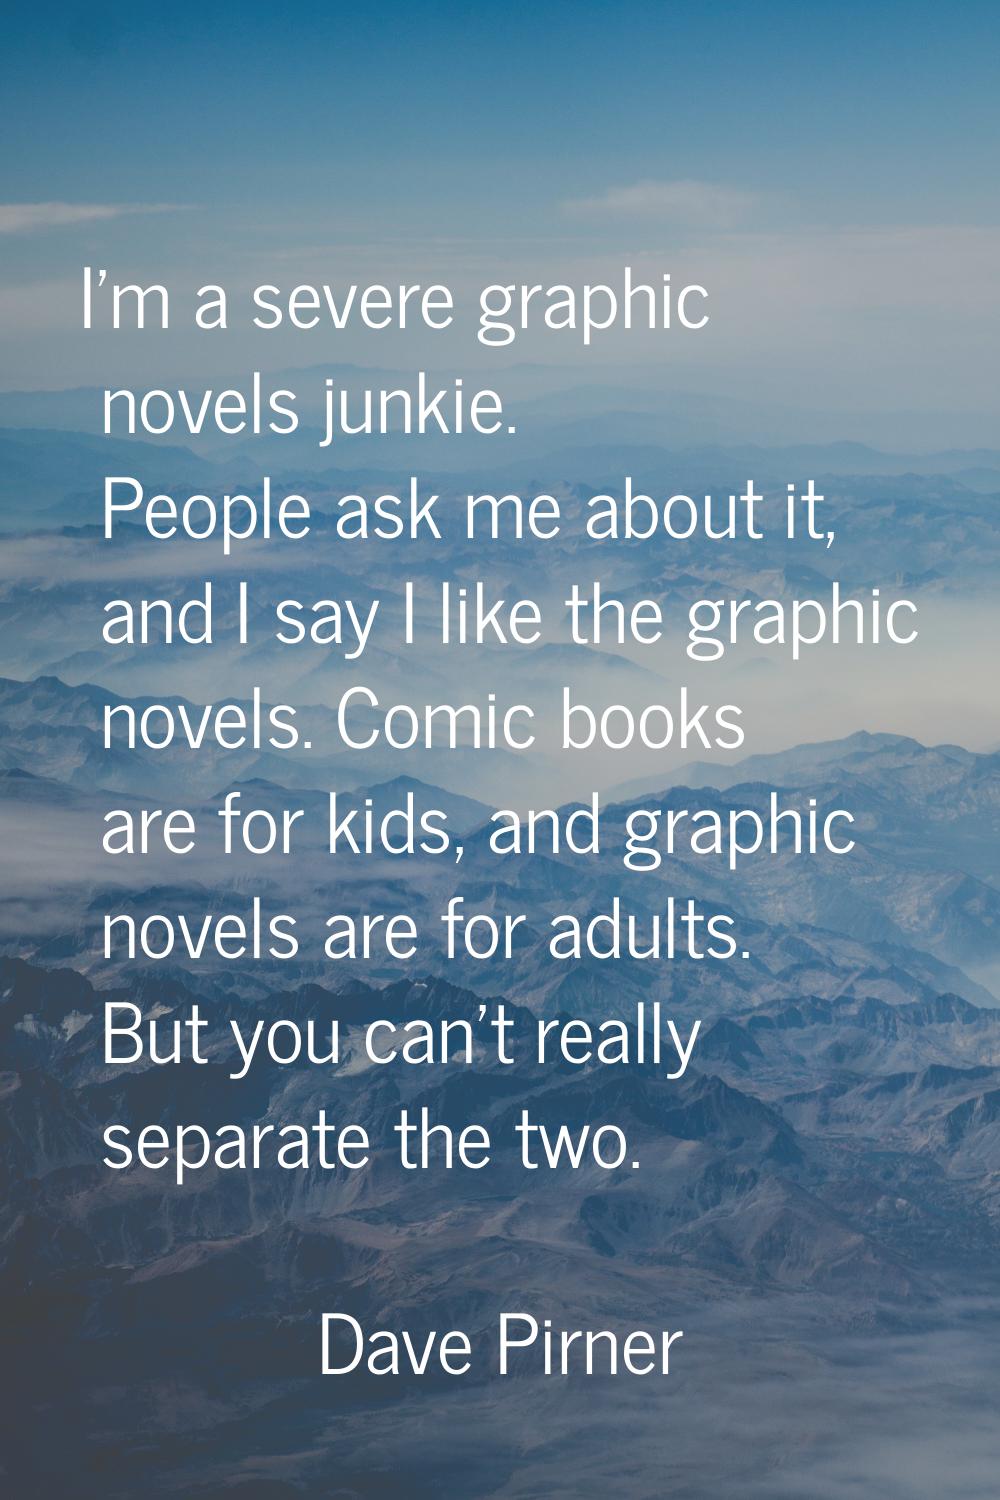 I'm a severe graphic novels junkie. People ask me about it, and I say I like the graphic novels. Co